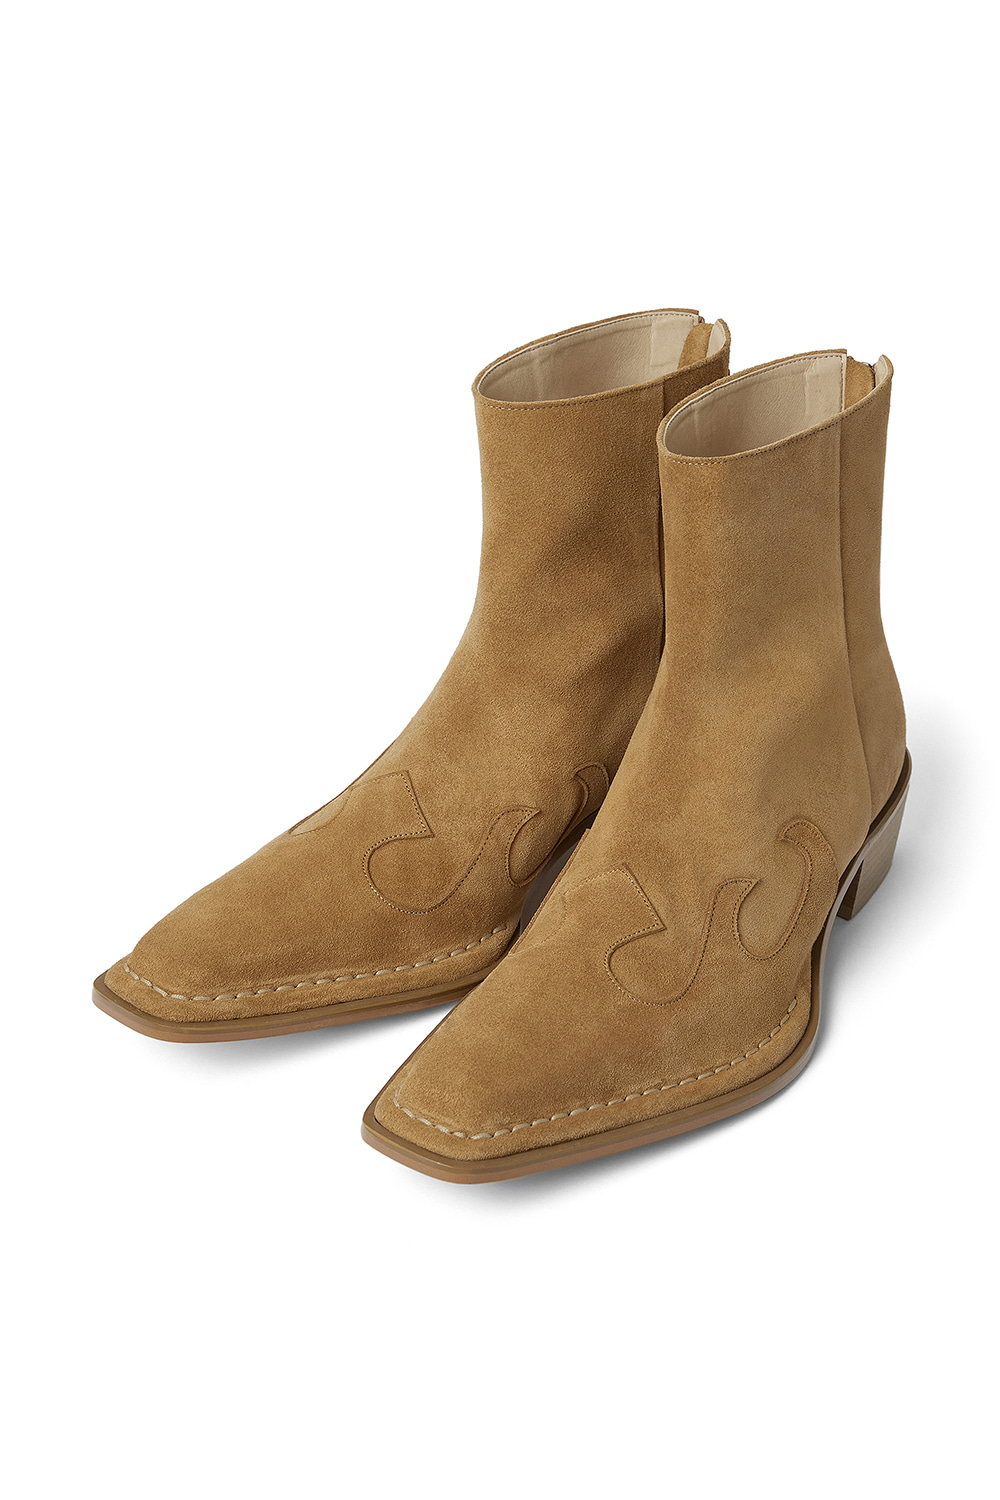 WESTERN ANKLE BOOTS [CAMEL SUEDE]		